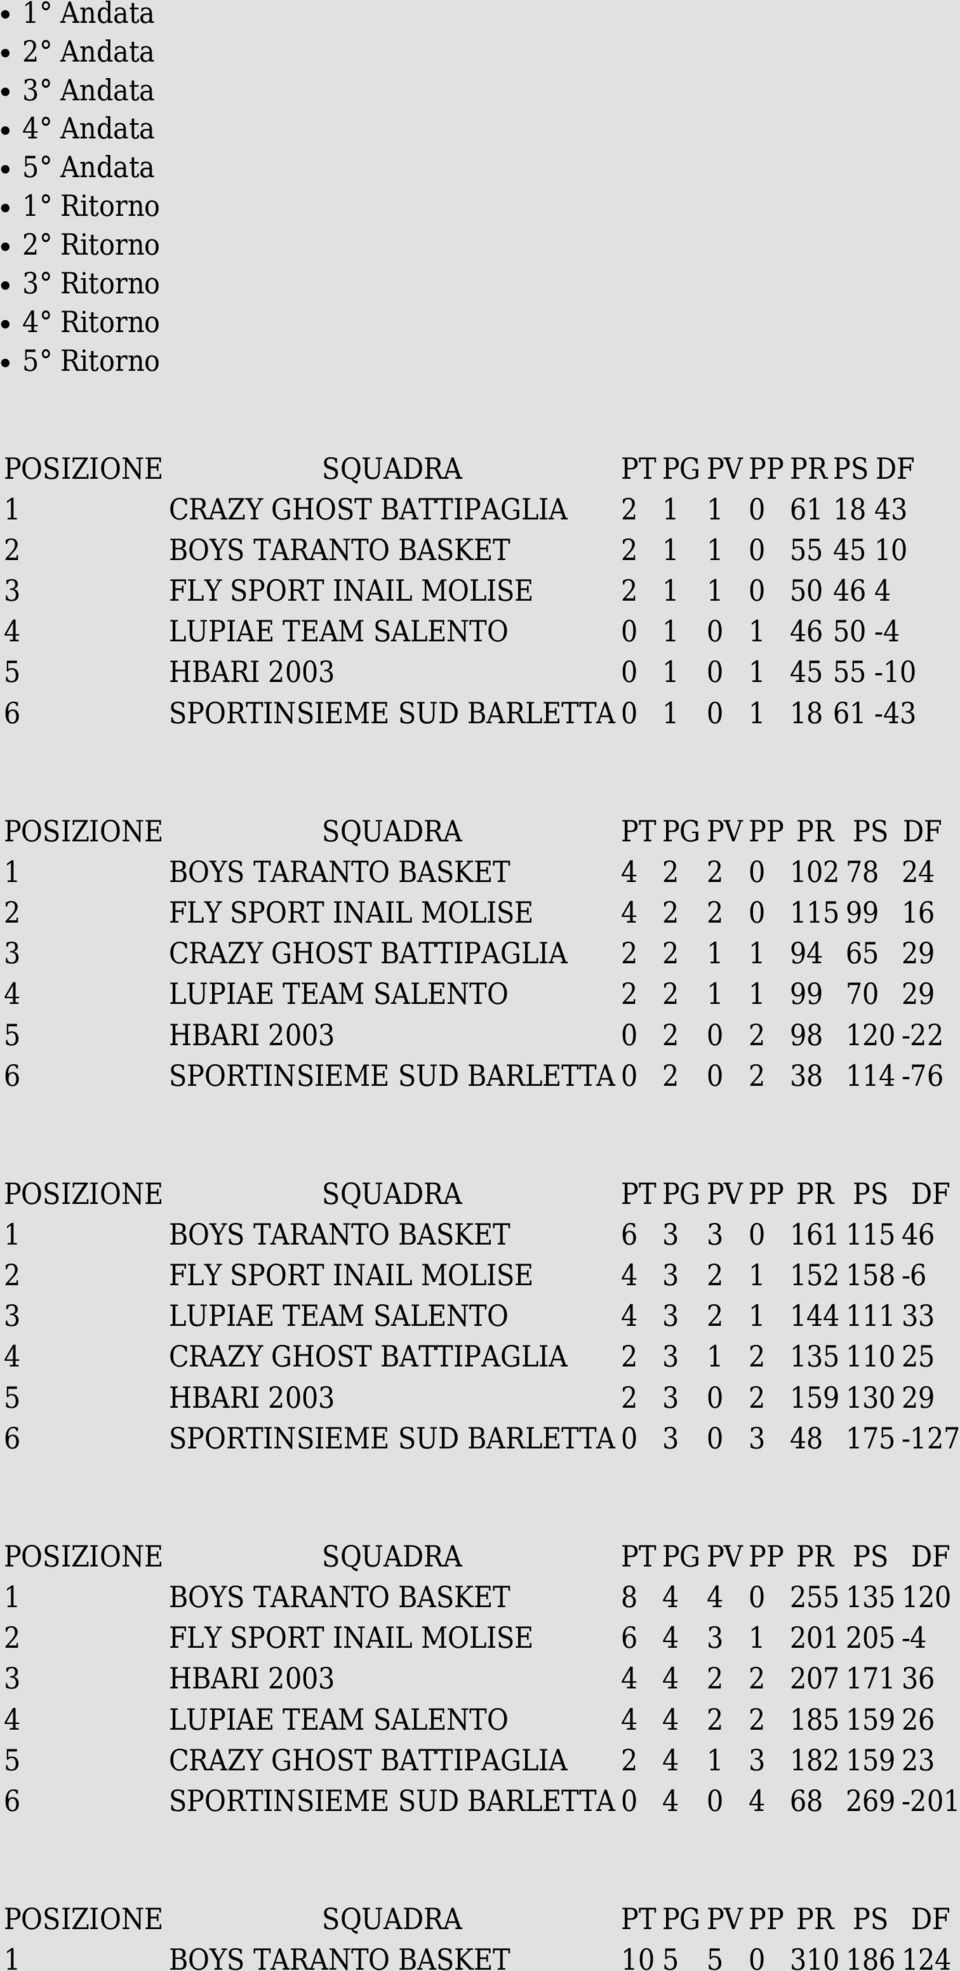 120-22 6 0 2 0 2 38 114-76 1 6 3 3 0 161 115 46 2 FLY SPORT INAIL MOLISE 4 3 2 1 152 158-6 3 4 3 2 1 144 111 33 4 CRAZY GHOST BATTIPAGLIA 2 3 1 2 135 110 25 5 2 3 0 2 159 130 29 6 0 3 0 3 48